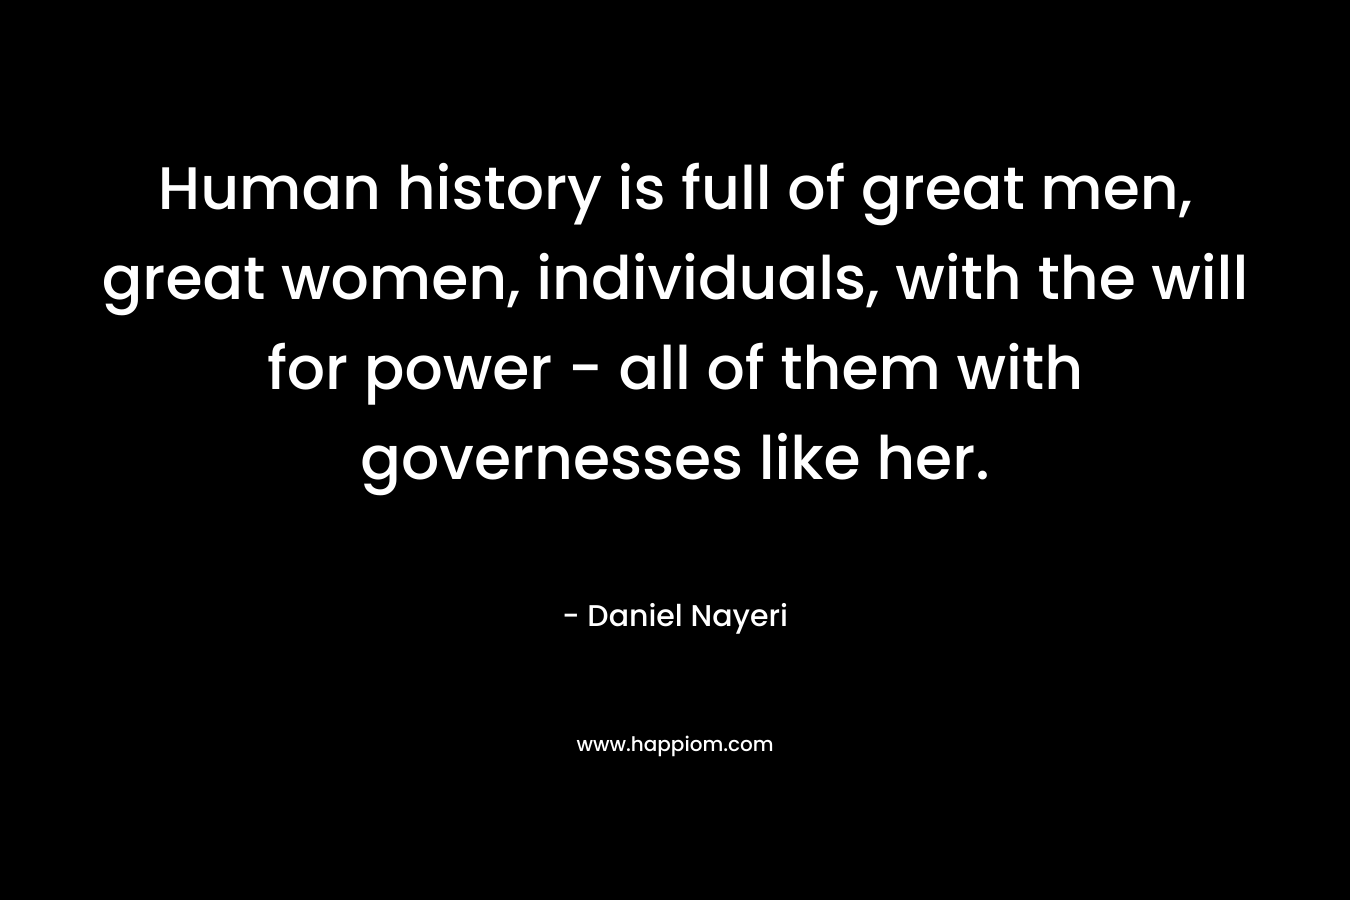 Human history is full of great men, great women, individuals, with the will for power - all of them with governesses like her.